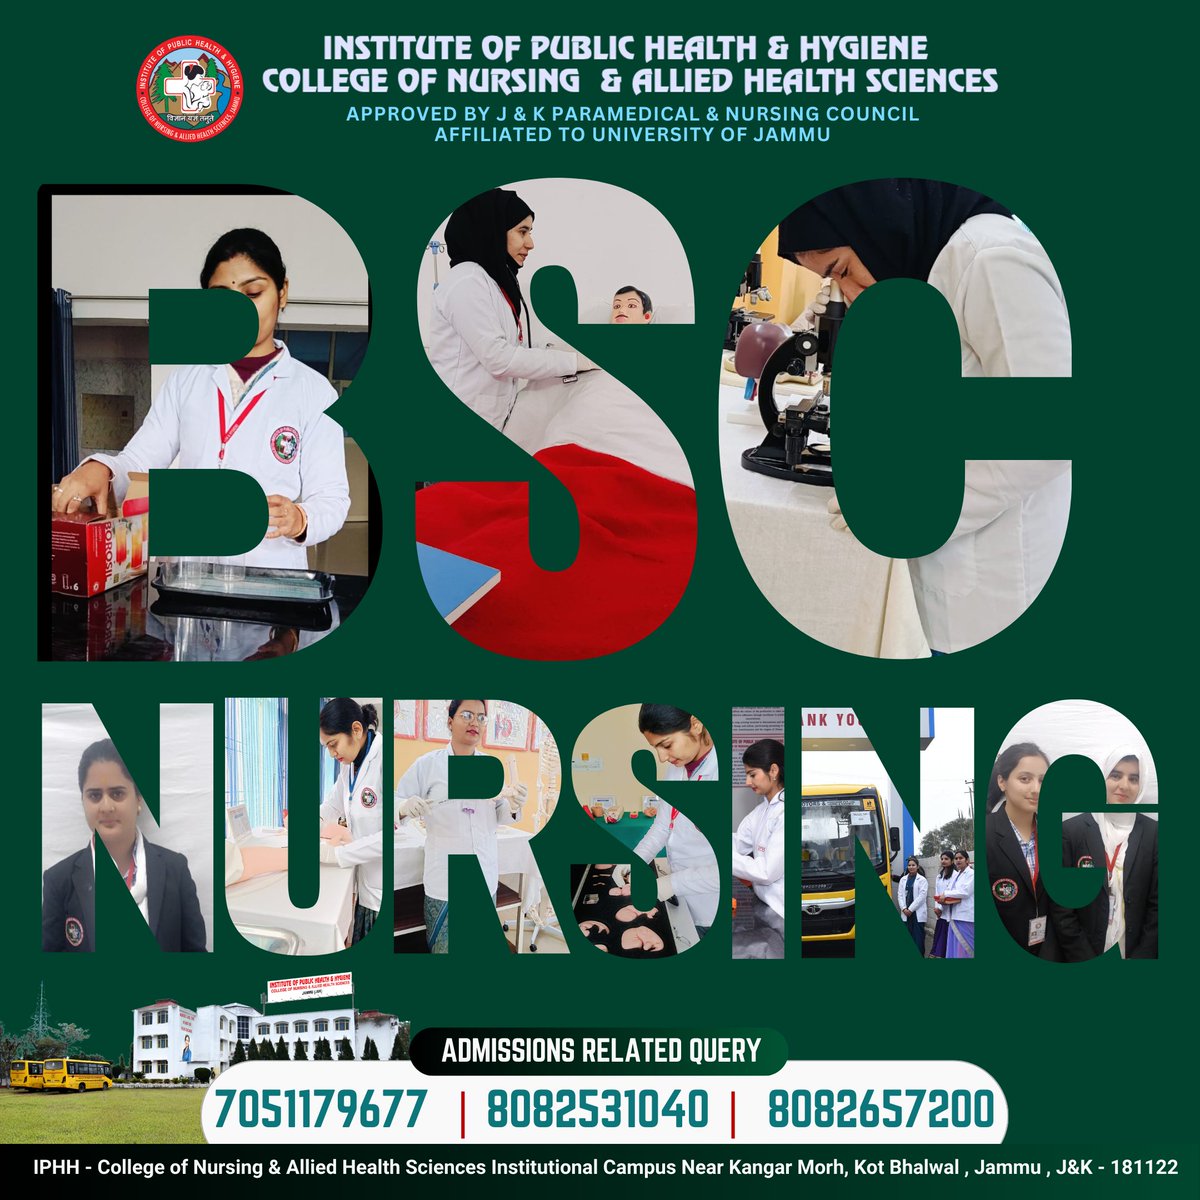 Welcome to IPH&H- College of Nursing & Allied Health Sciences, Jammu (India) 🔸An Institution with a glorious past of 48 years,Recognised by J&K State Para-Medical Council and Affiliated to the University of Jammu  CONTACT US @ 7051179677 / 8082531040/ 8082657200.
#Saturdayvibes